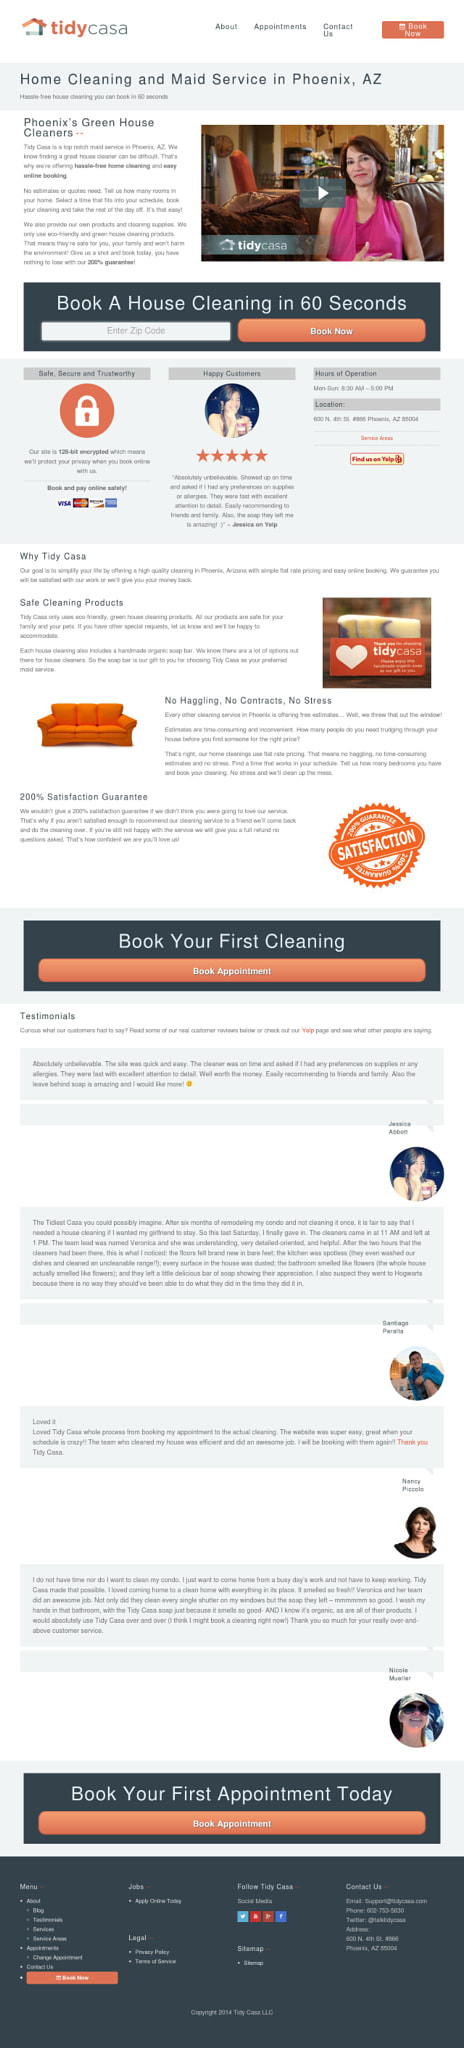 Home Cleaning and Maid Service